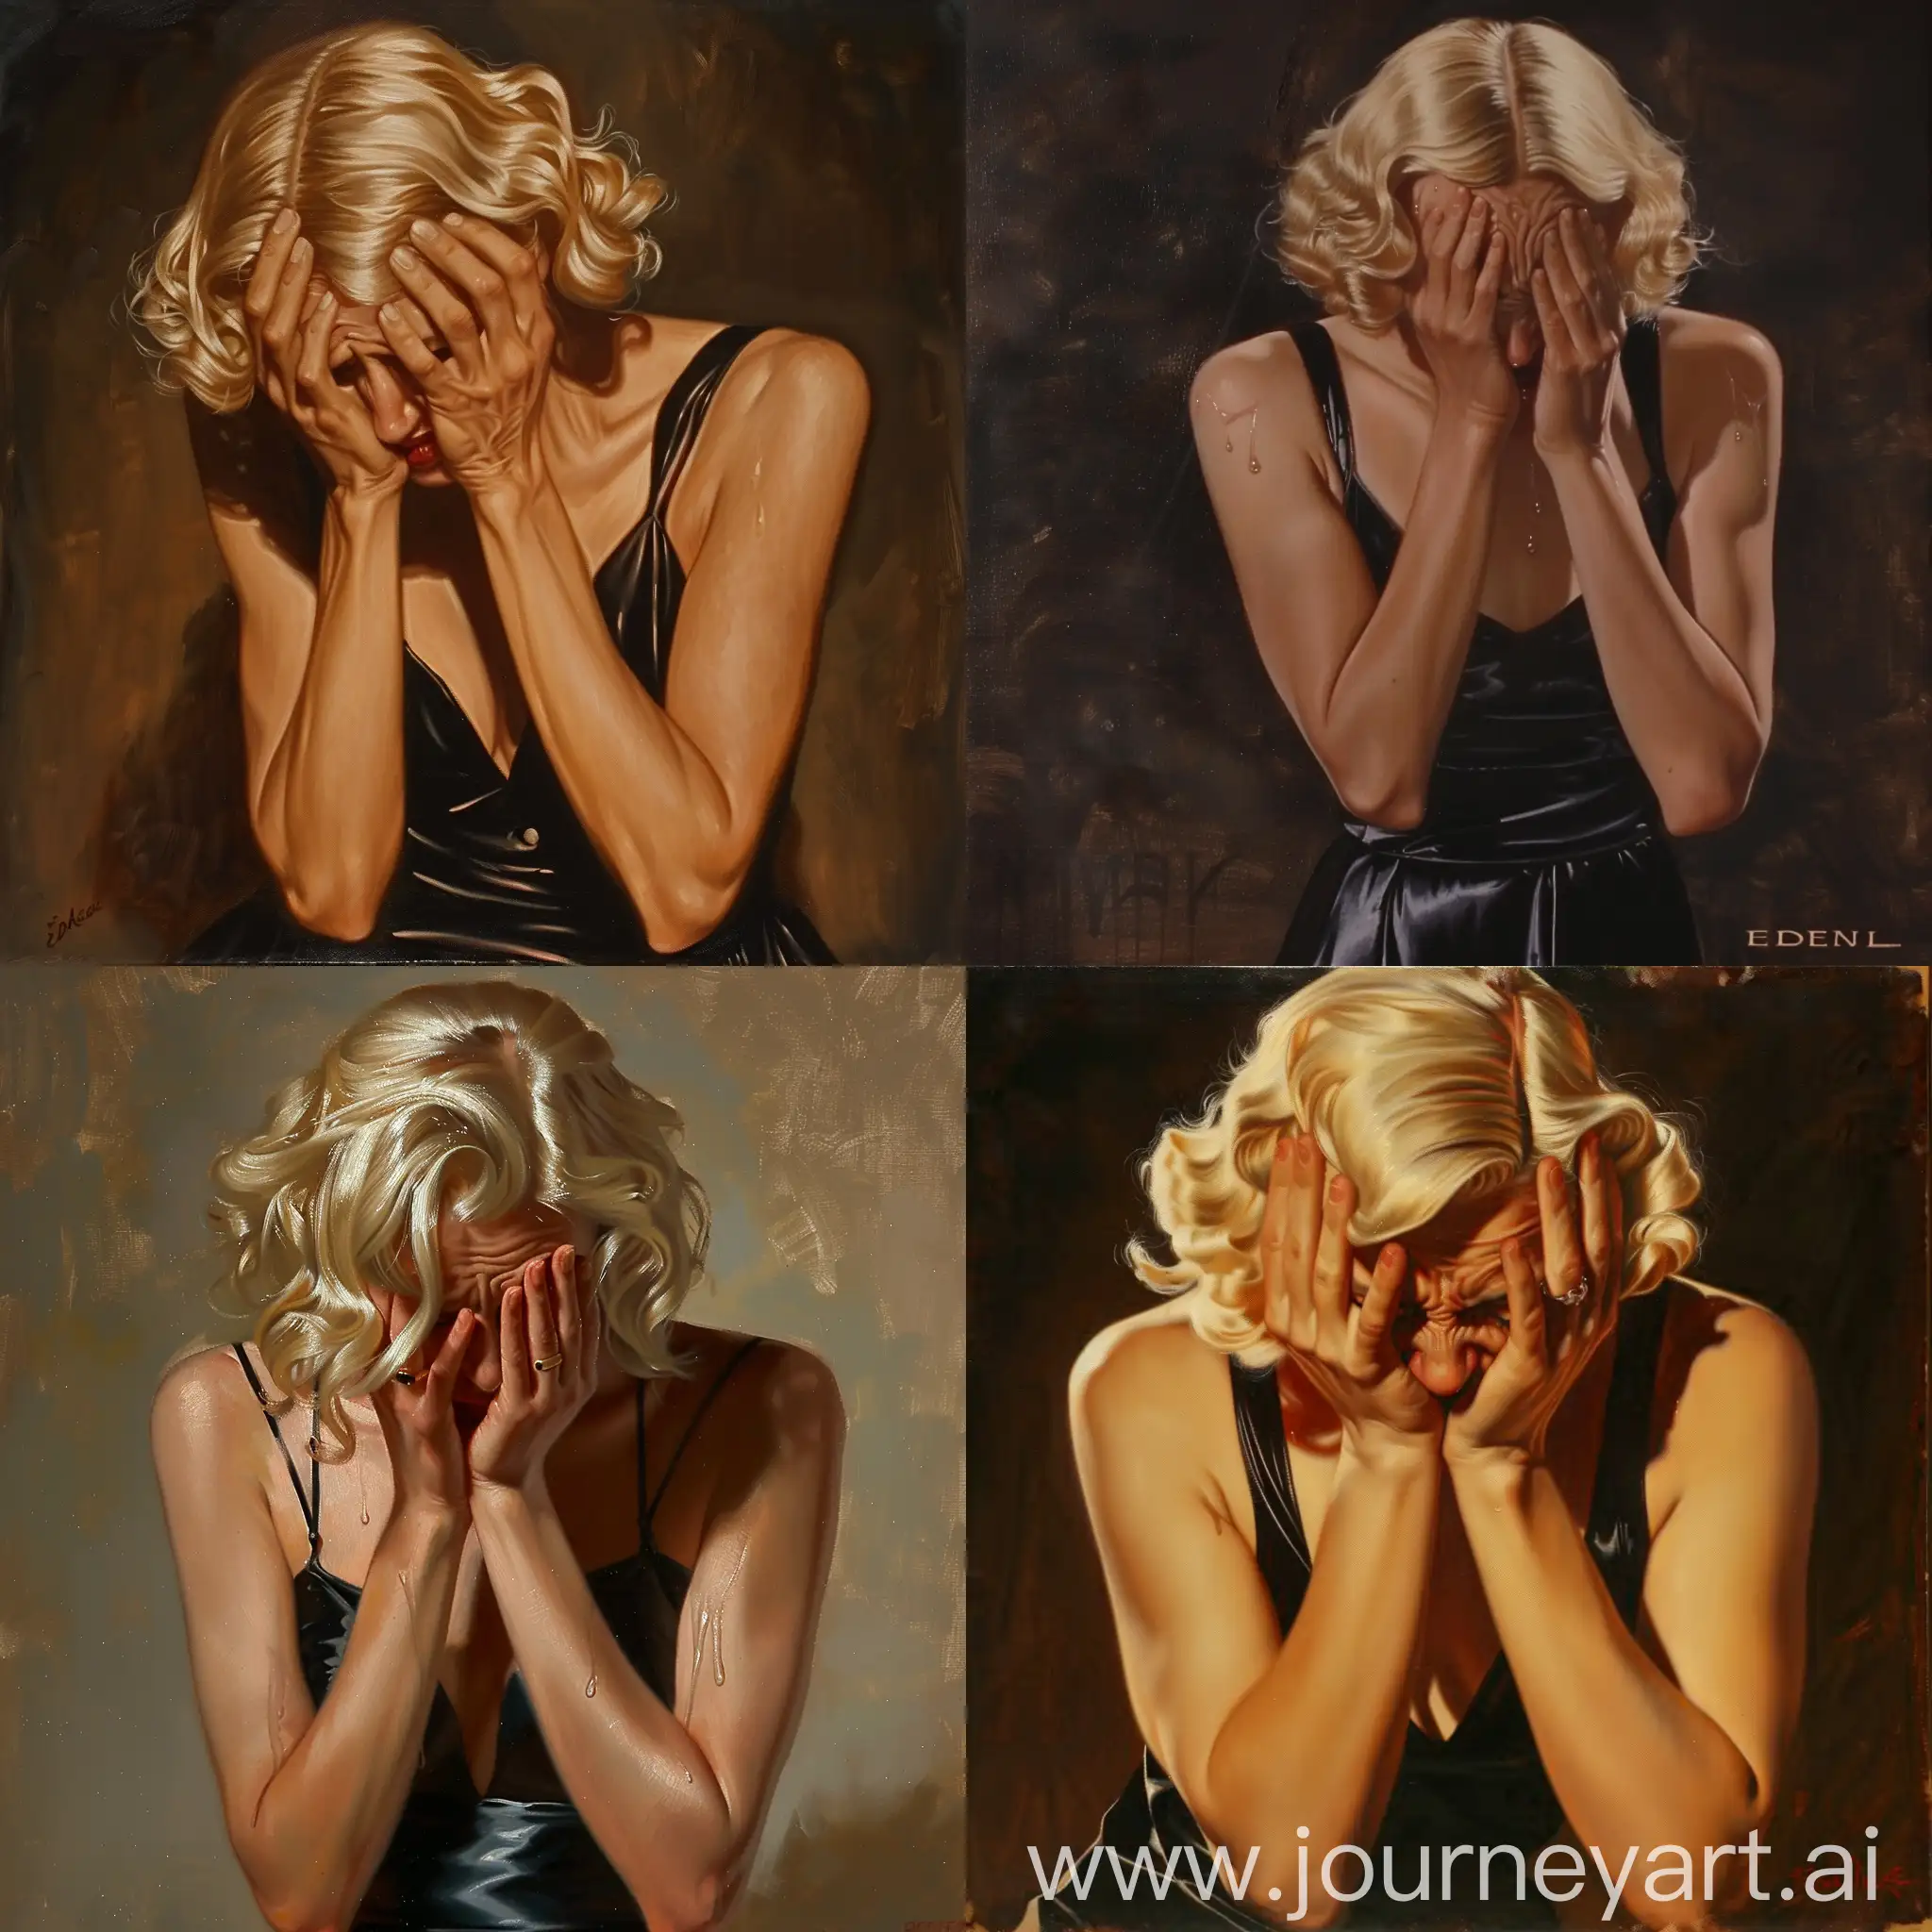 Depressed-1930s-Woman-in-Black-Satin-Slip-Dress-Vintage-Oil-Painting-with-Edward-Hopper-Style